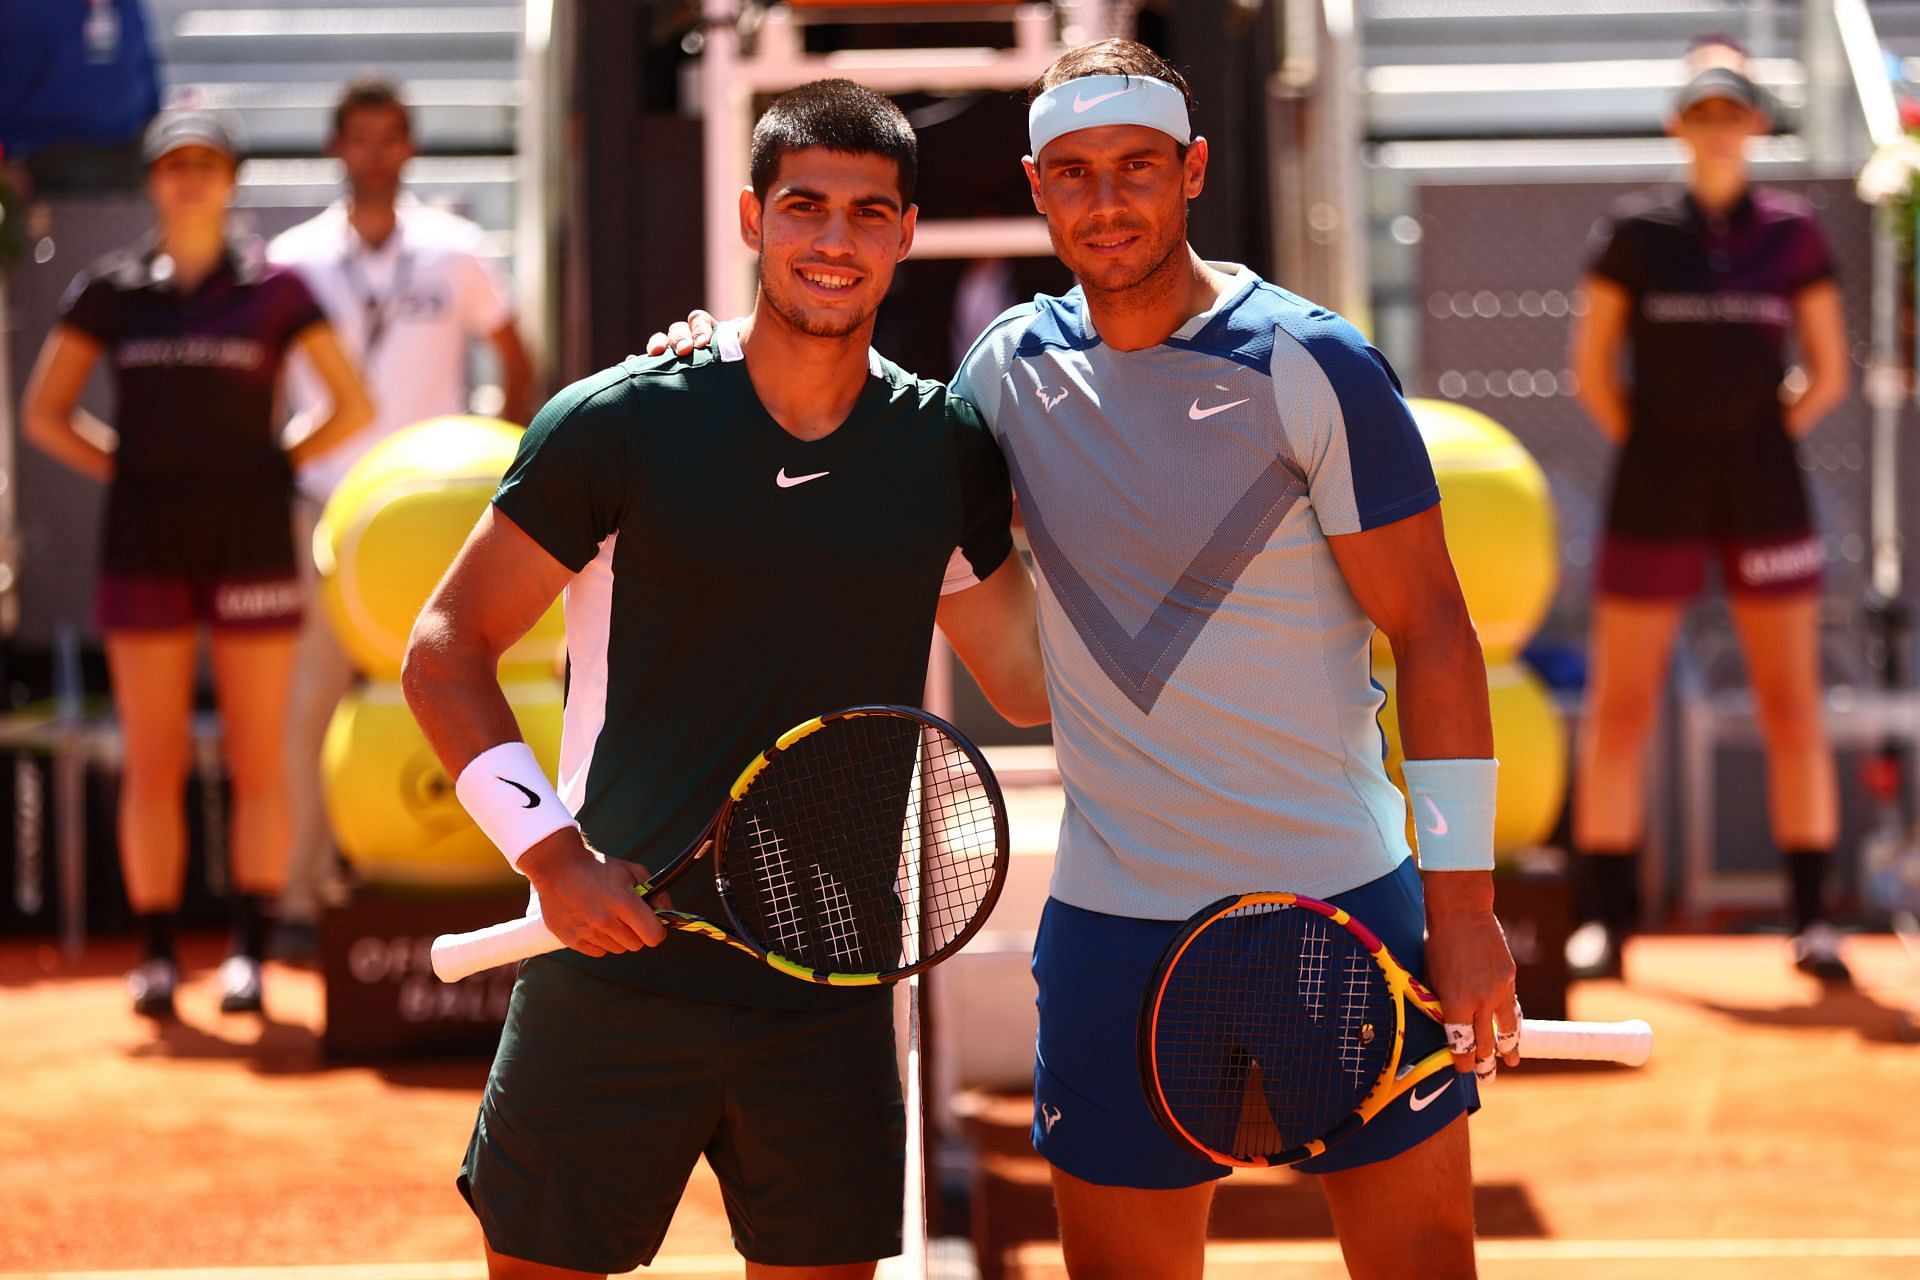 Carlos Alcaraz and Rafael Nadal became the first non-American pair to be year-end World No. 1 and No. 2.